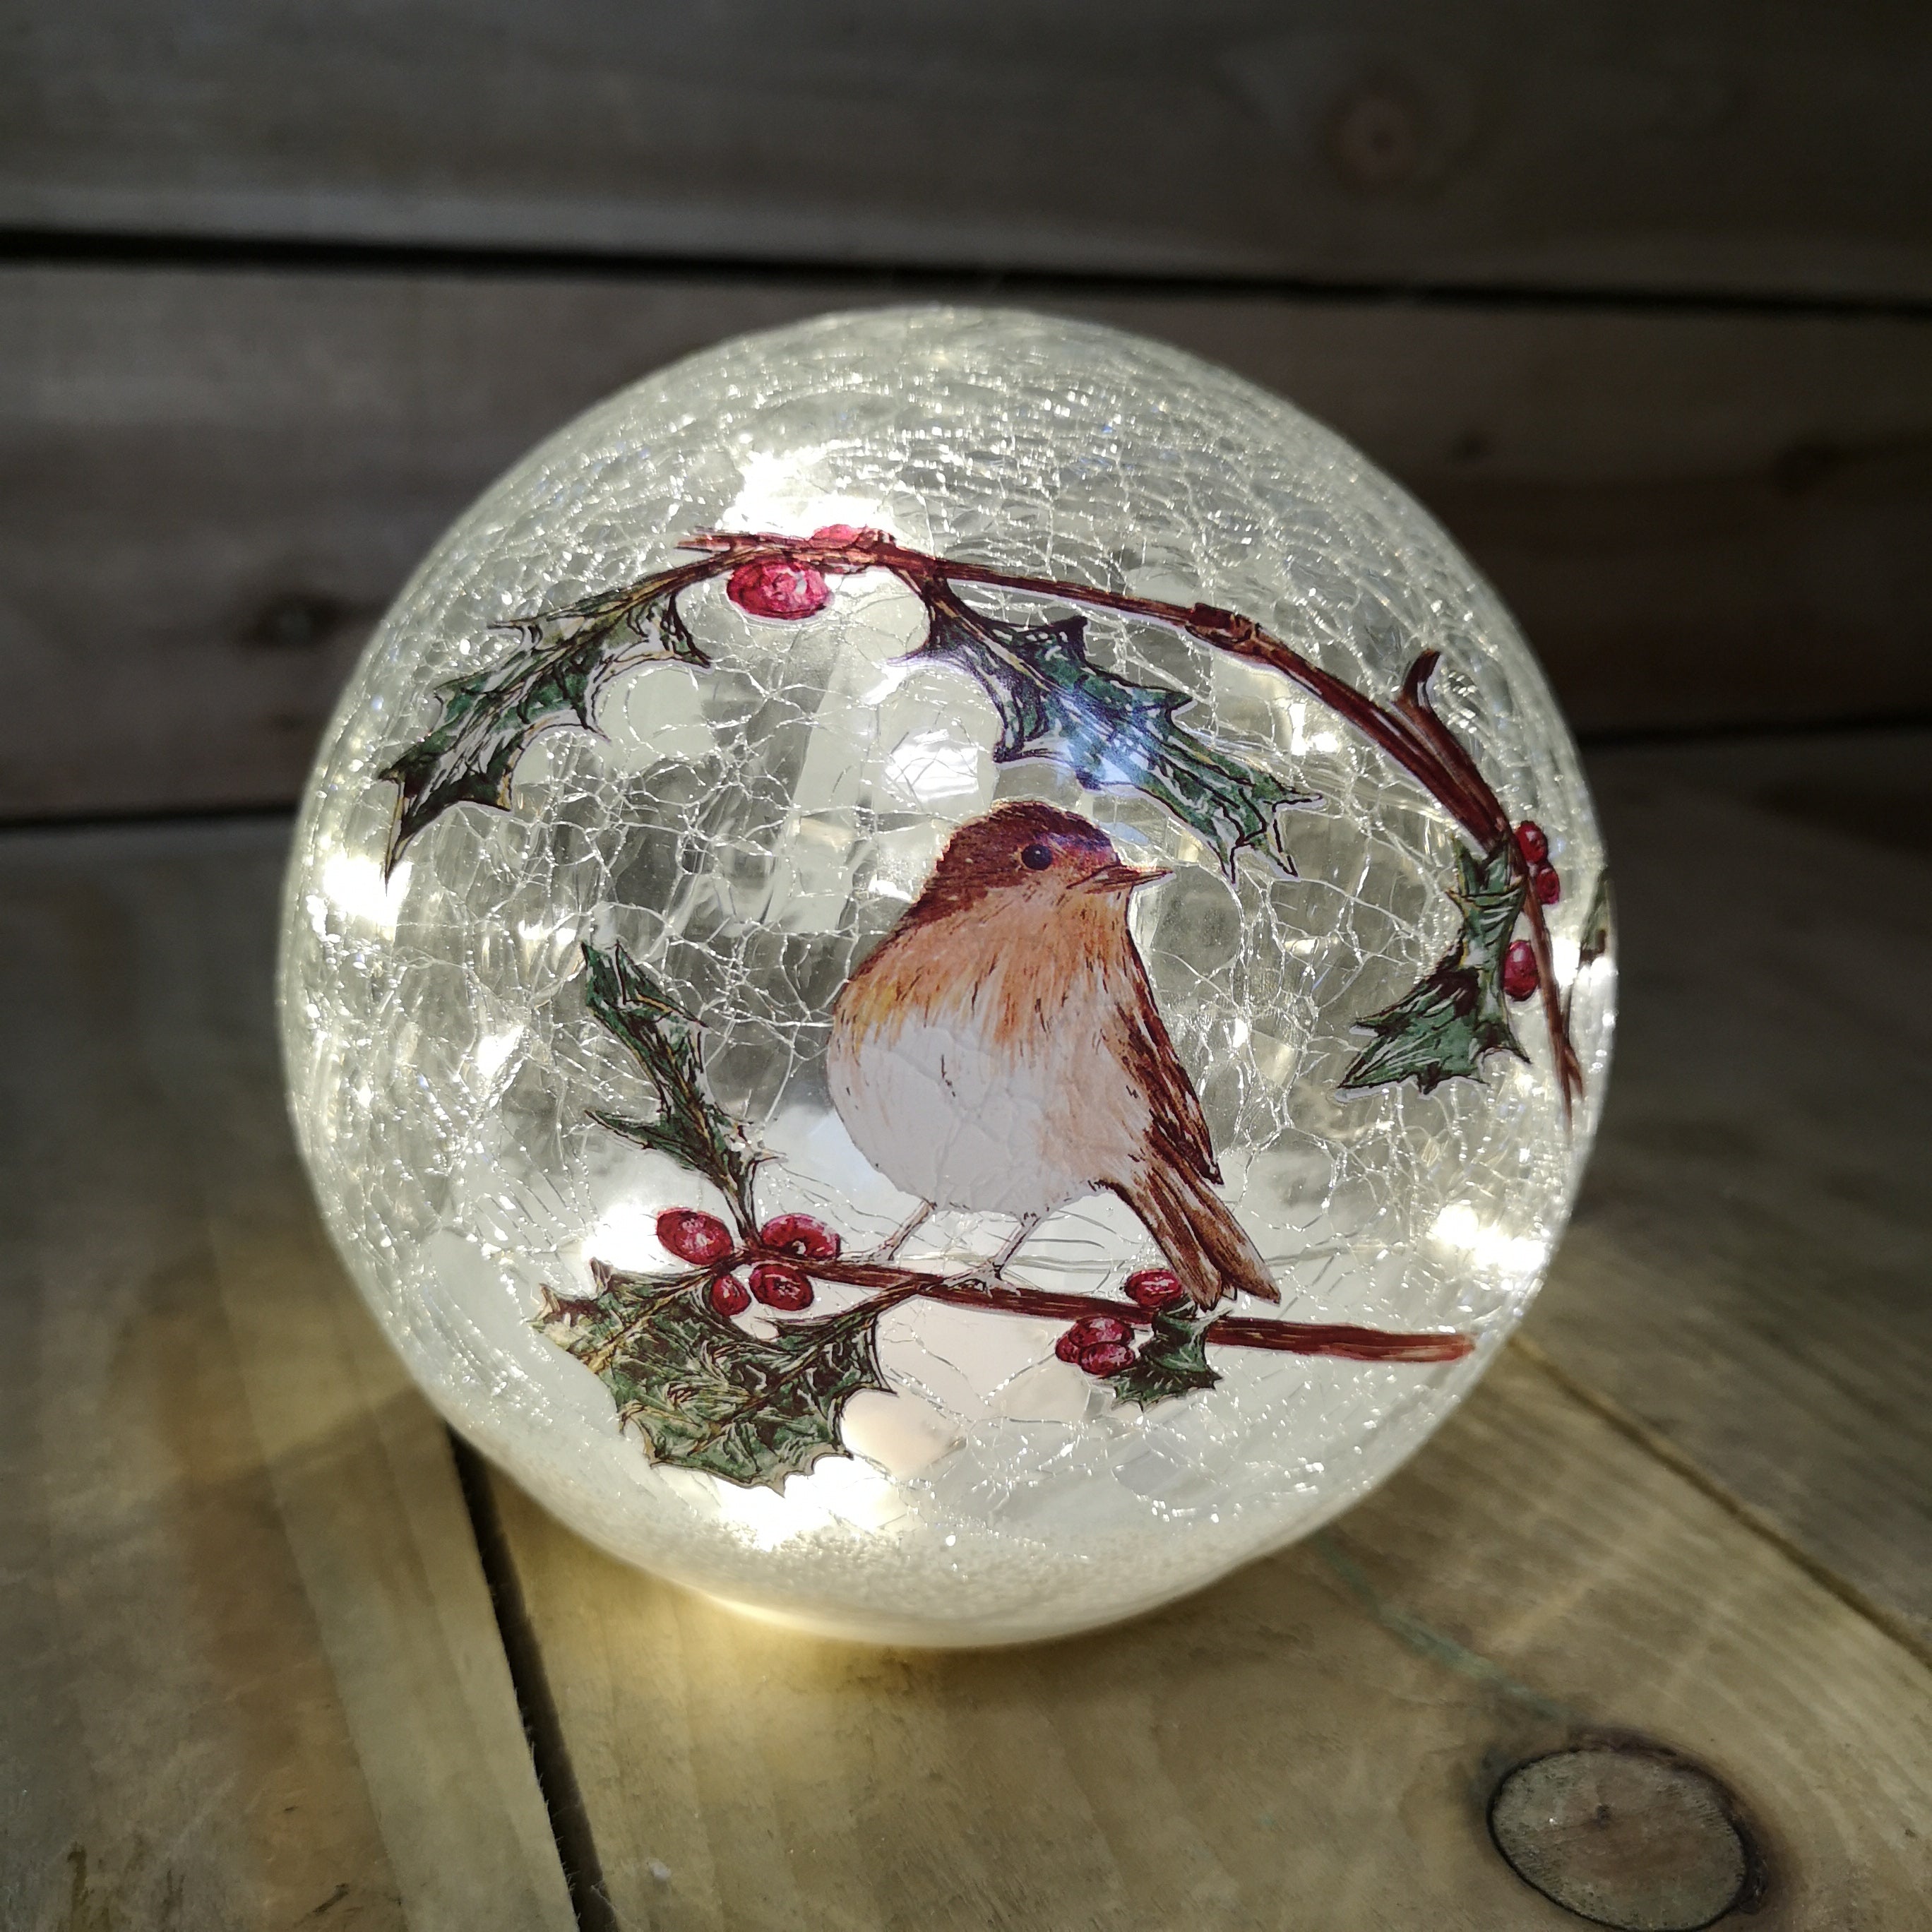 Festive 15cm Battery Operated Indoor Christmas LED Lit Crackle Effect Robin Ball